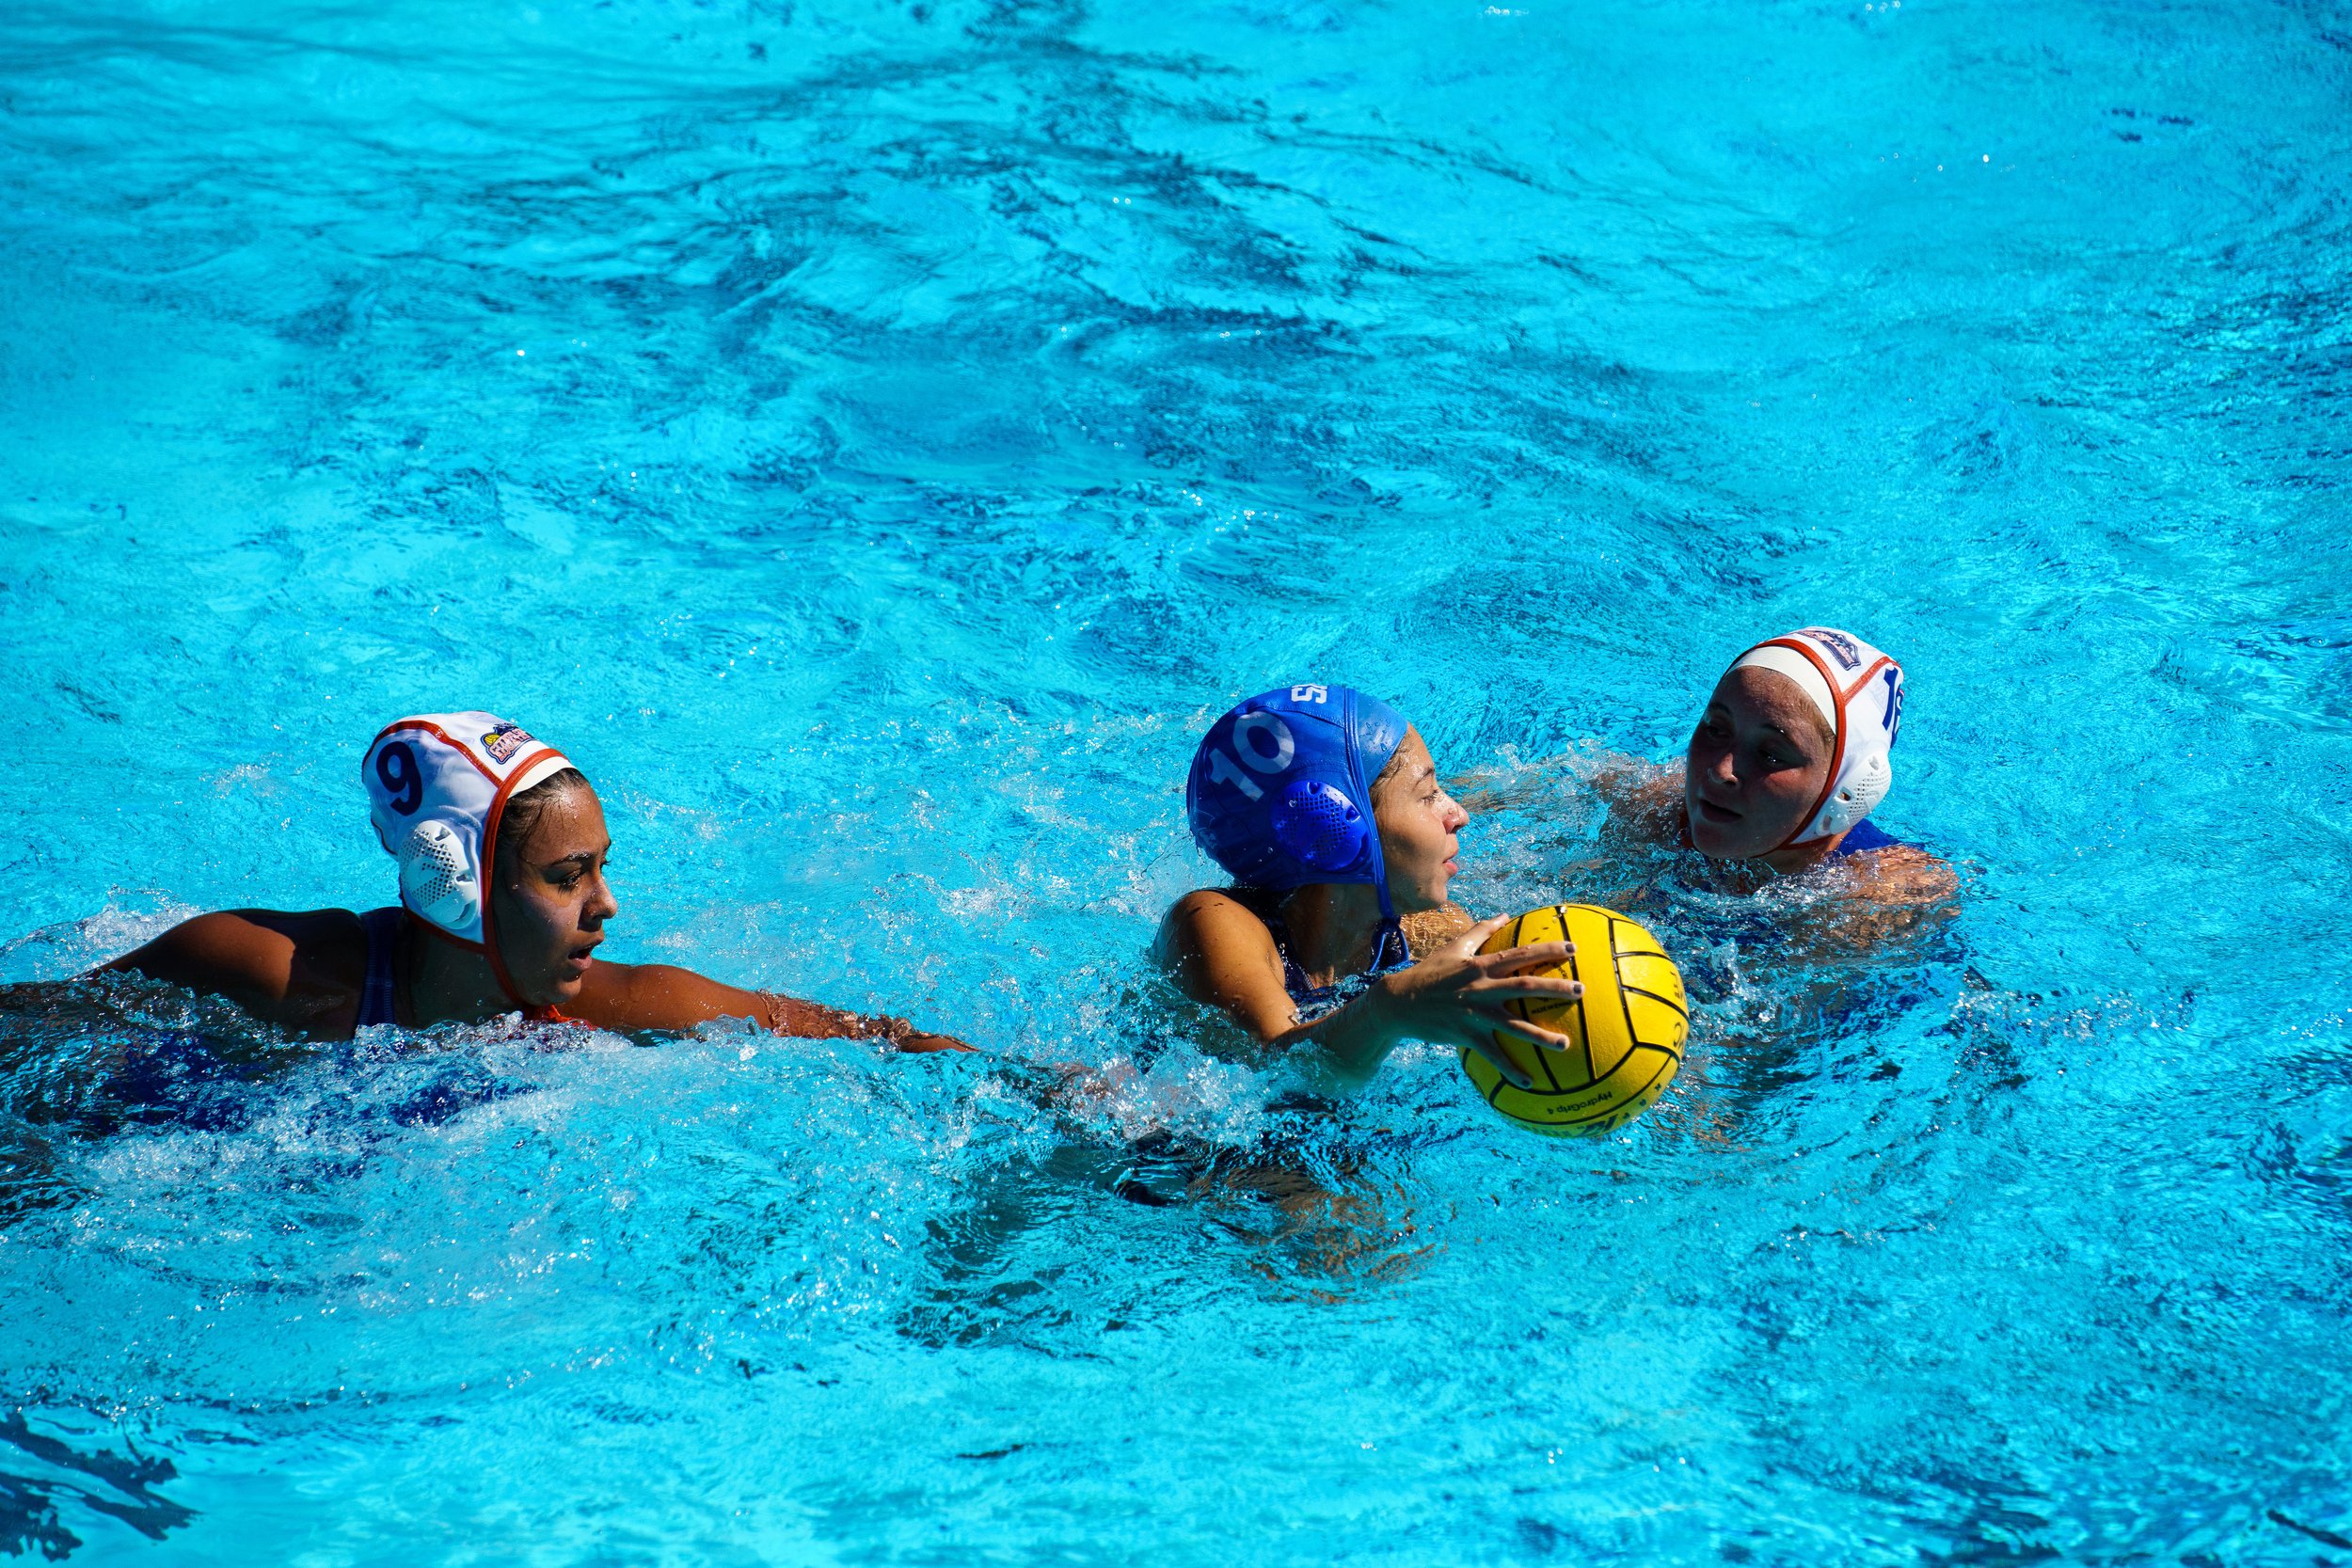  Santa Monica College (SMC) women's water polo player 10 against the Citrus College Owls, at the SMC water polo conference on Thursday October 5th, 2023 in Santa Monica, Calif. The final score was 21-4, with the Owls winning. (Elizabeth Bacher | The 